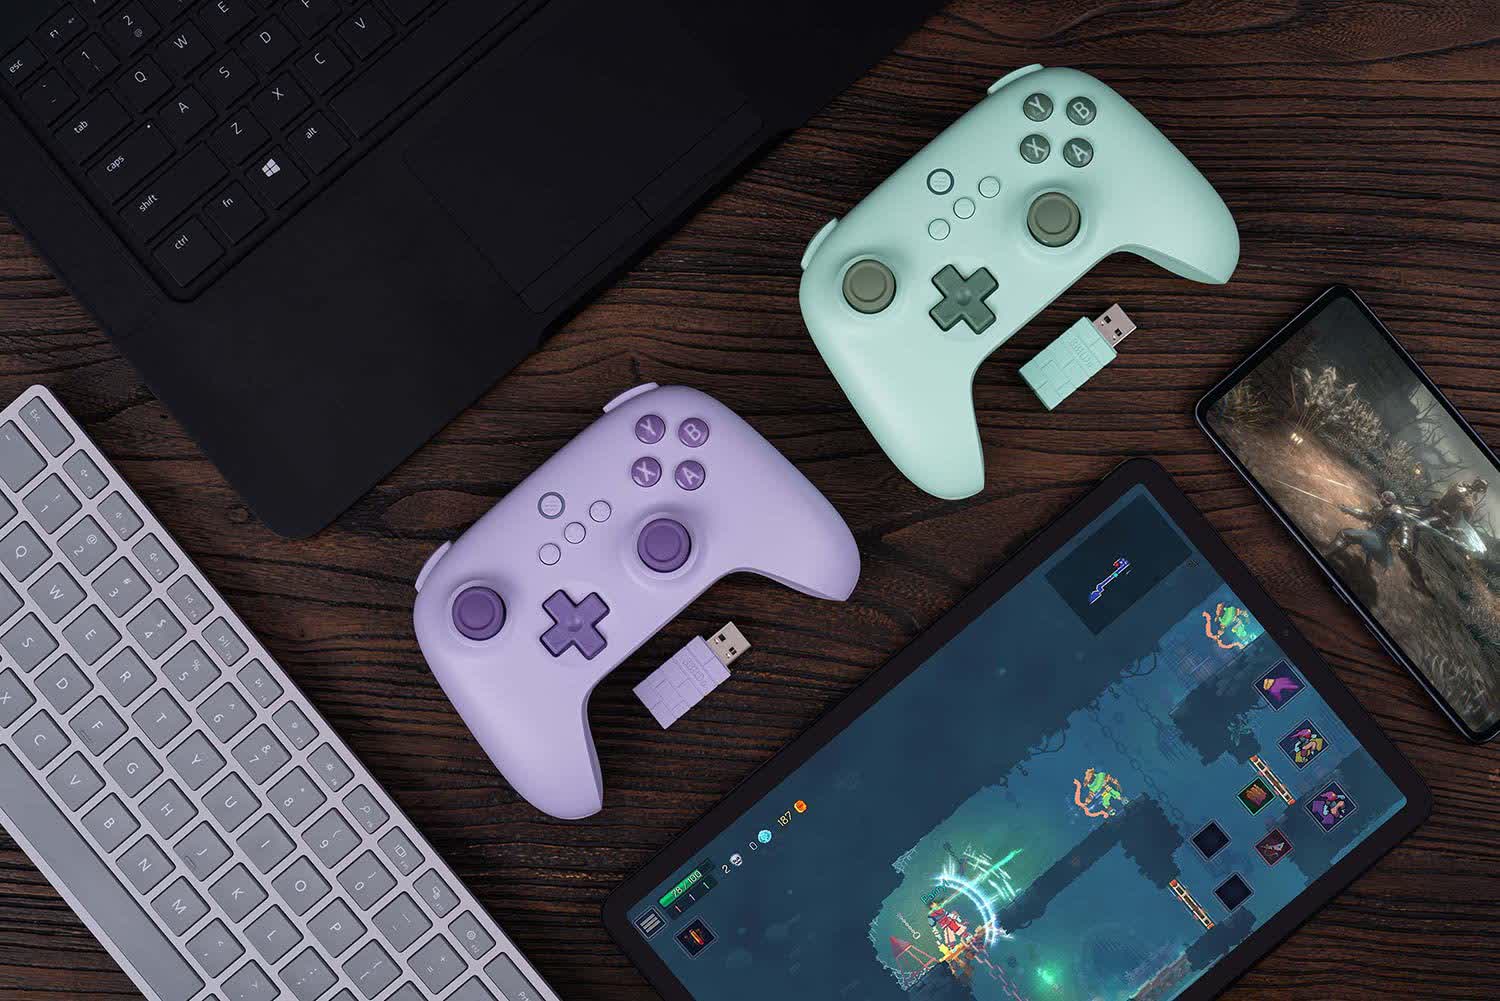 8BitDo opens pre-orders for no-frills Ultimate C gamepads starting under $20